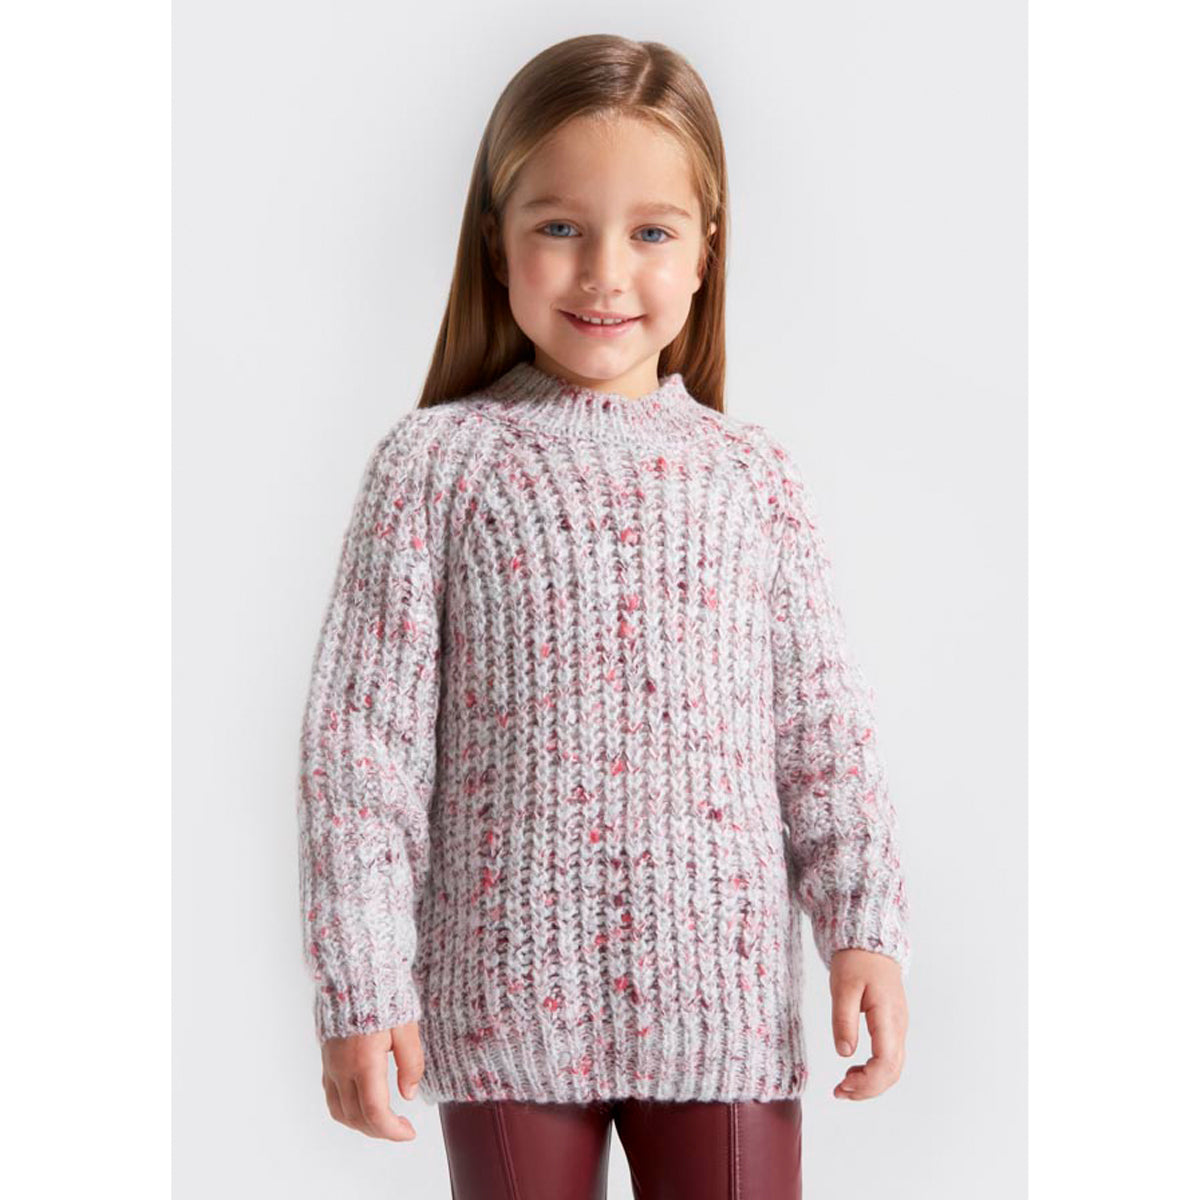 Natural Raspberry Knit Sweater